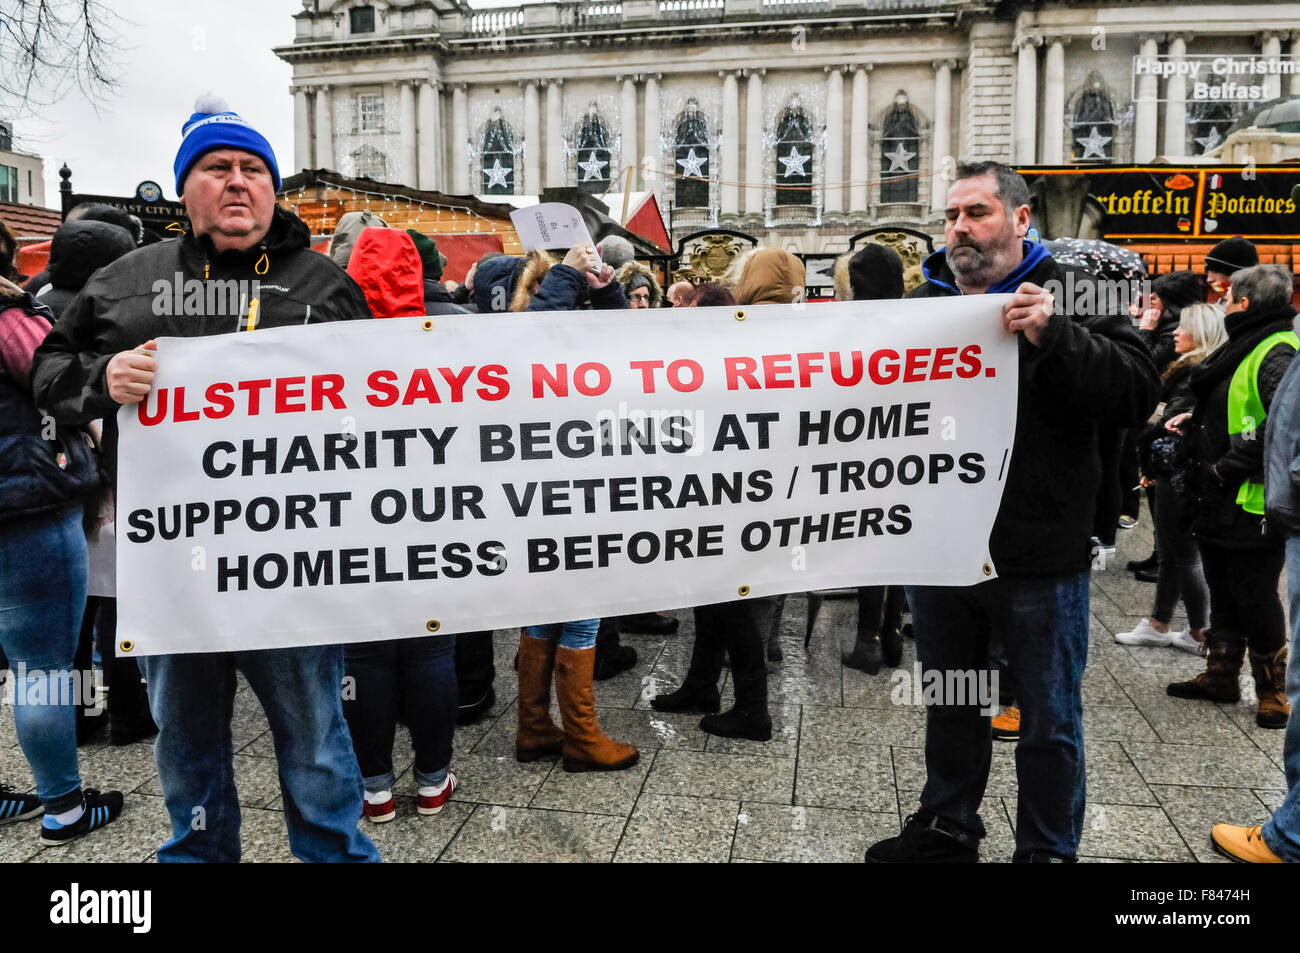 Belfast, Northern Ireland. 05 Dec 2015 - Protestant Coalition supporters hold banner which says 'Ulster says no to refugees.  Charity begins at home.  Support our veterans/troops/homeless before others' at a protest against Islamic refugees coming to Northern Ireland. Credit:  Stephen Barnes/Alamy Live News Stock Photo